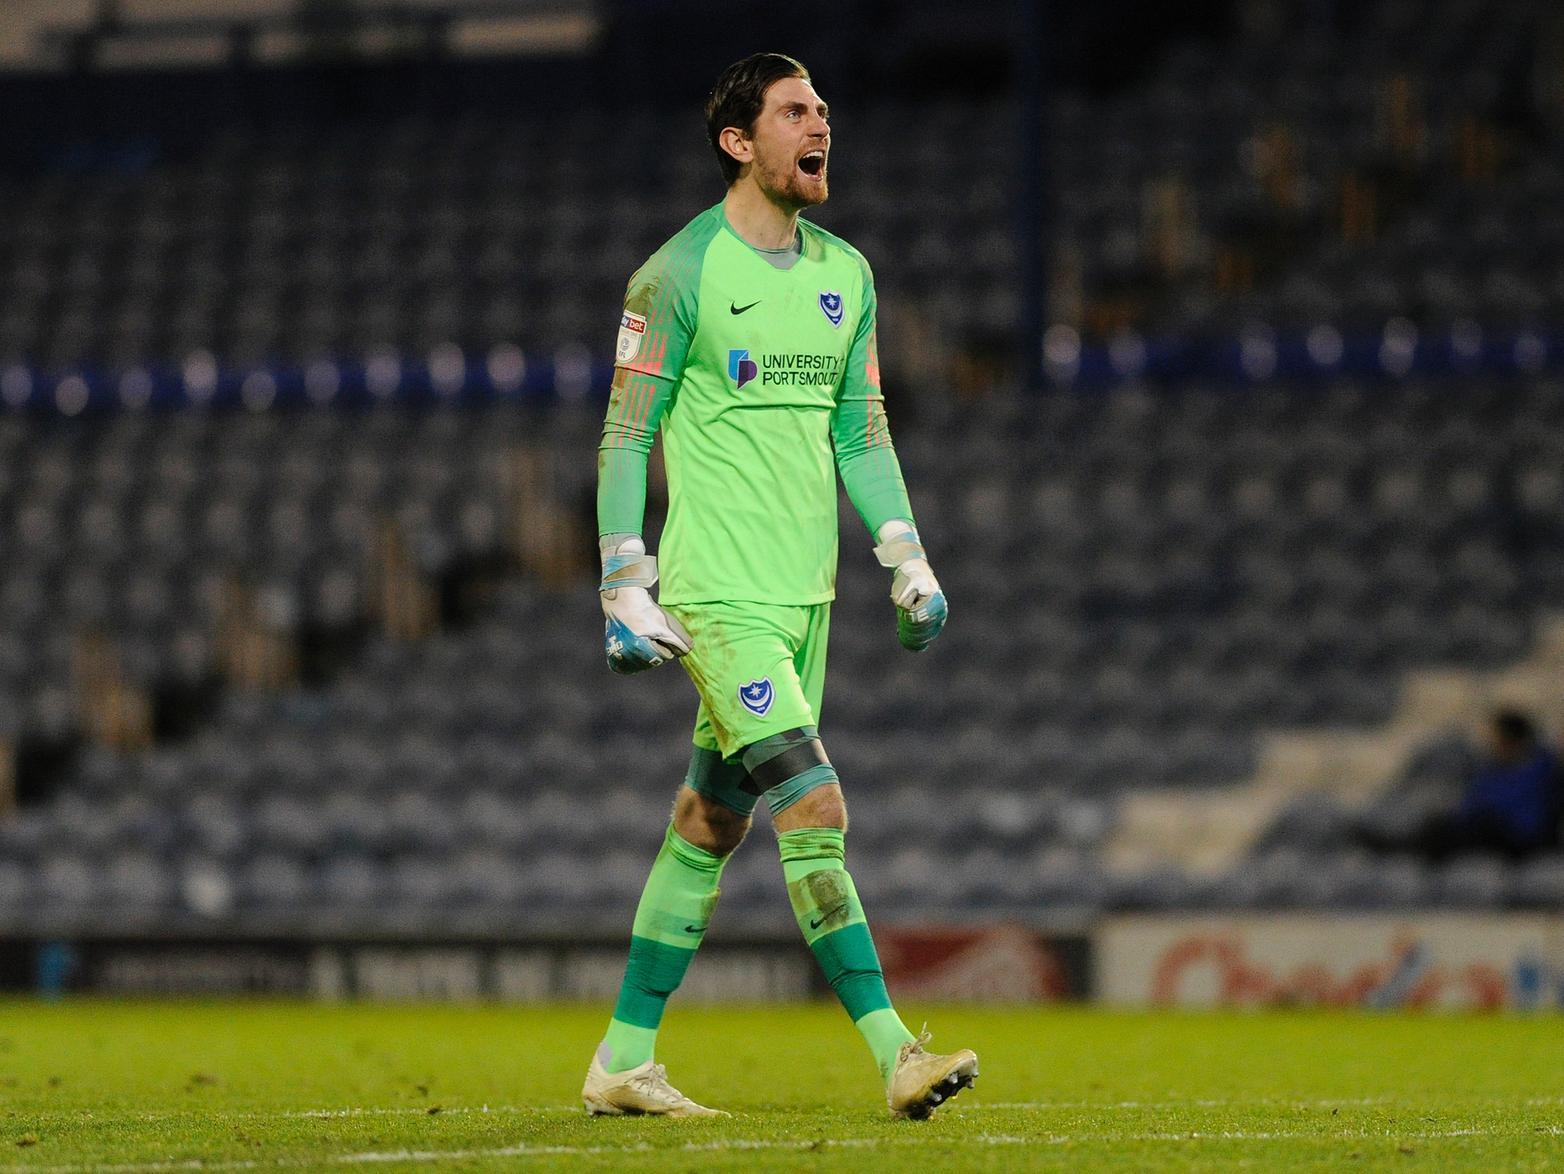 Portsmouth goalkeeper Luke McGee, formerly of Tottenham Hotspur, has been given permission to leave Fratton Park in January. (The News)